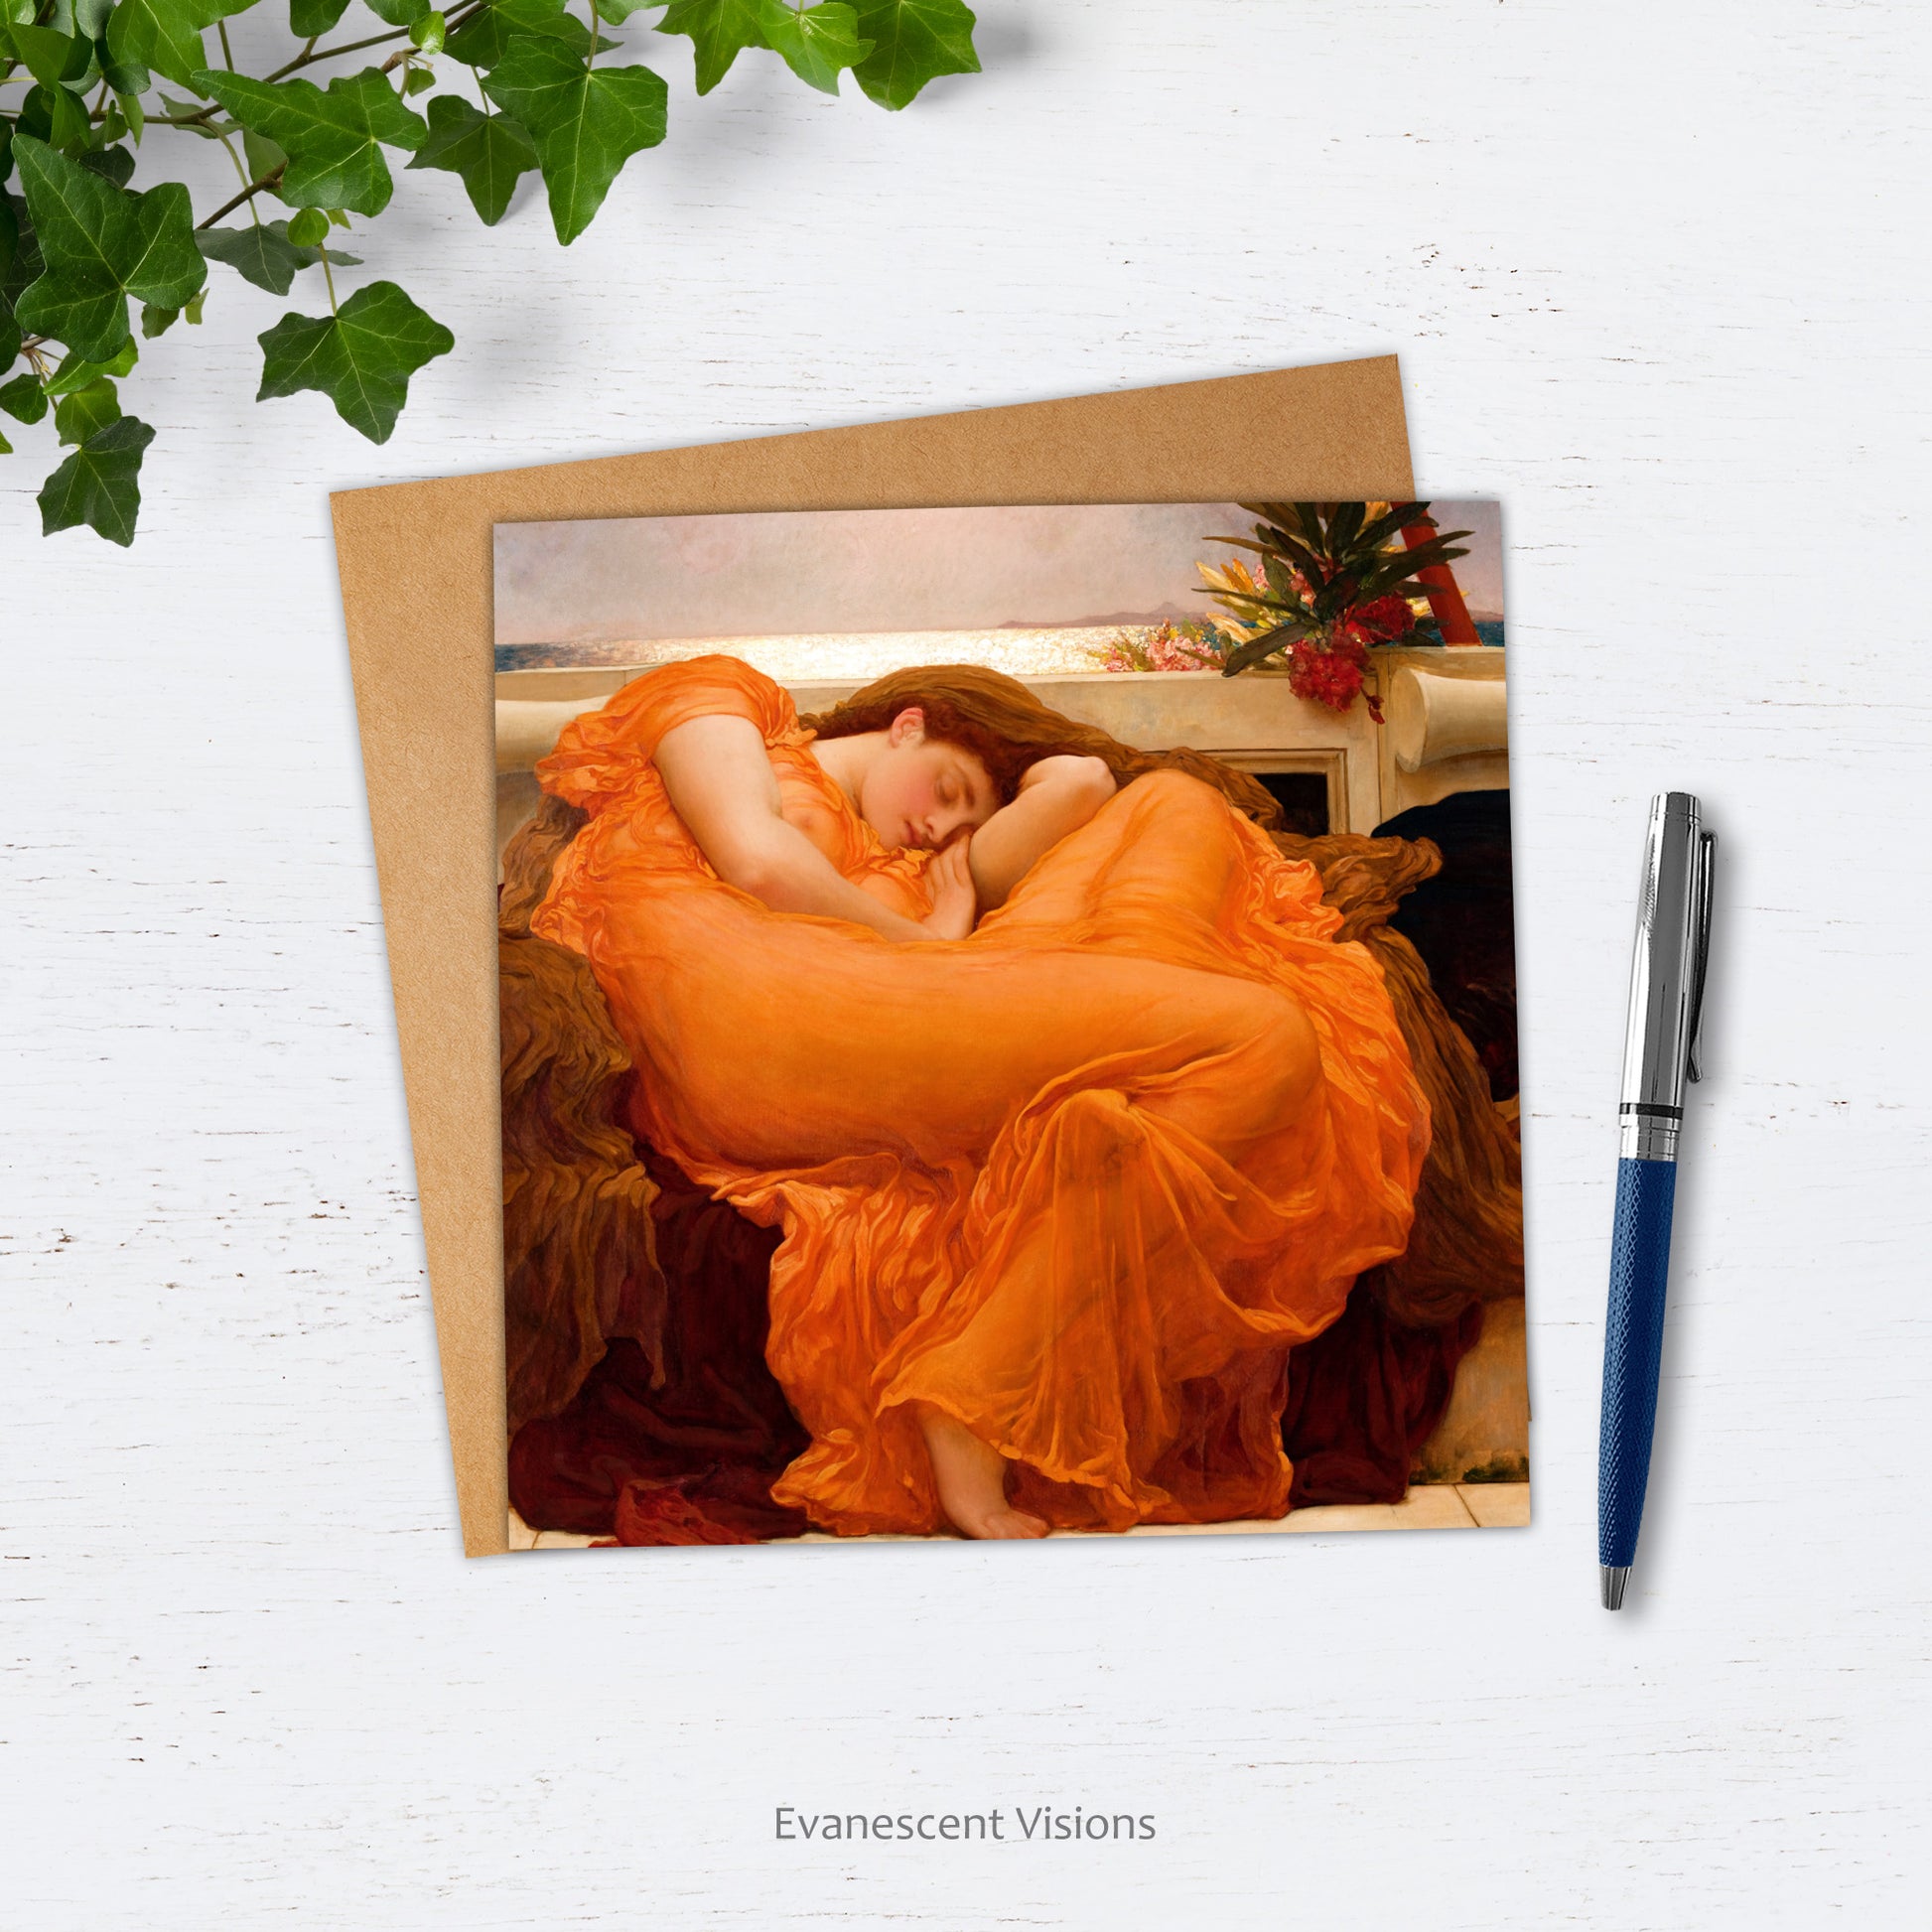 Card and envelope with design of Frederic Leighton's 'Flaming June' on white surface with pen and ivy.